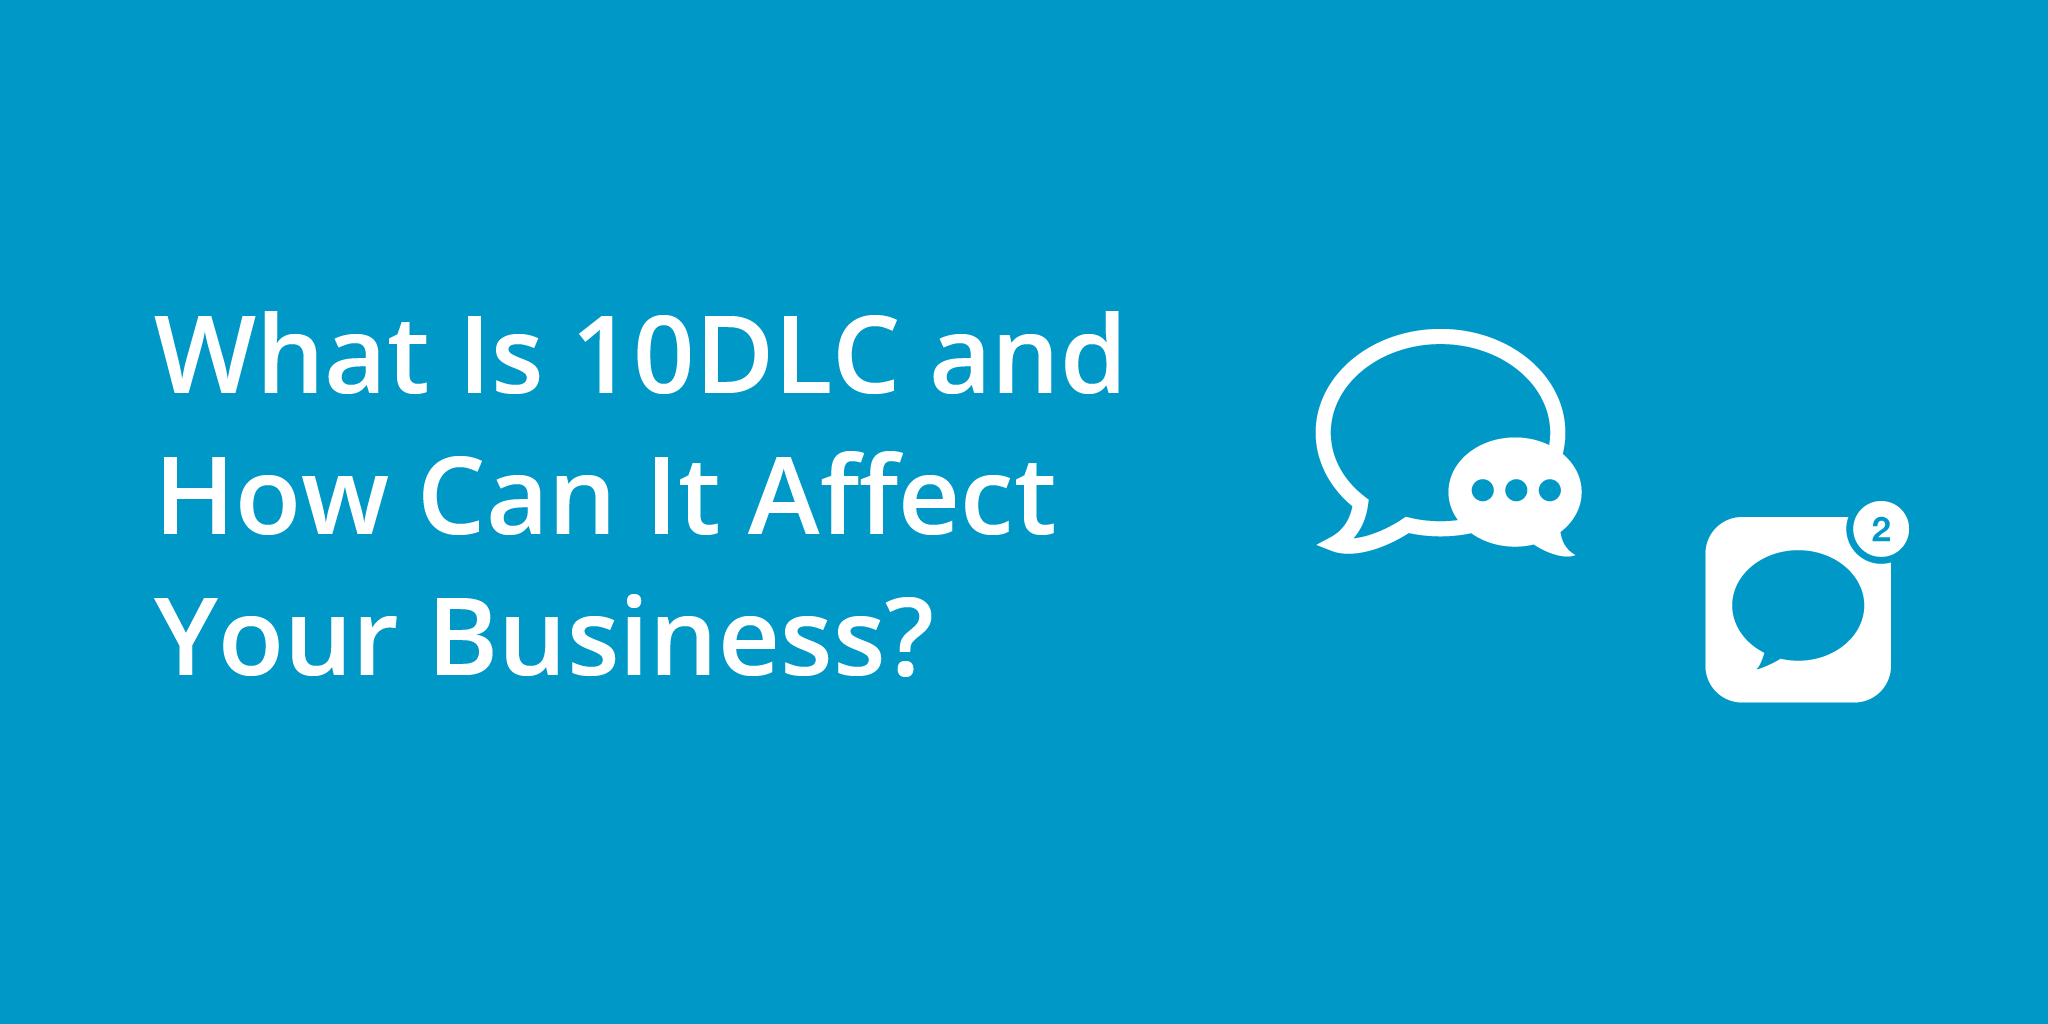 What Is 10DLC and How Can It Affect Your Business? | Telephones for business